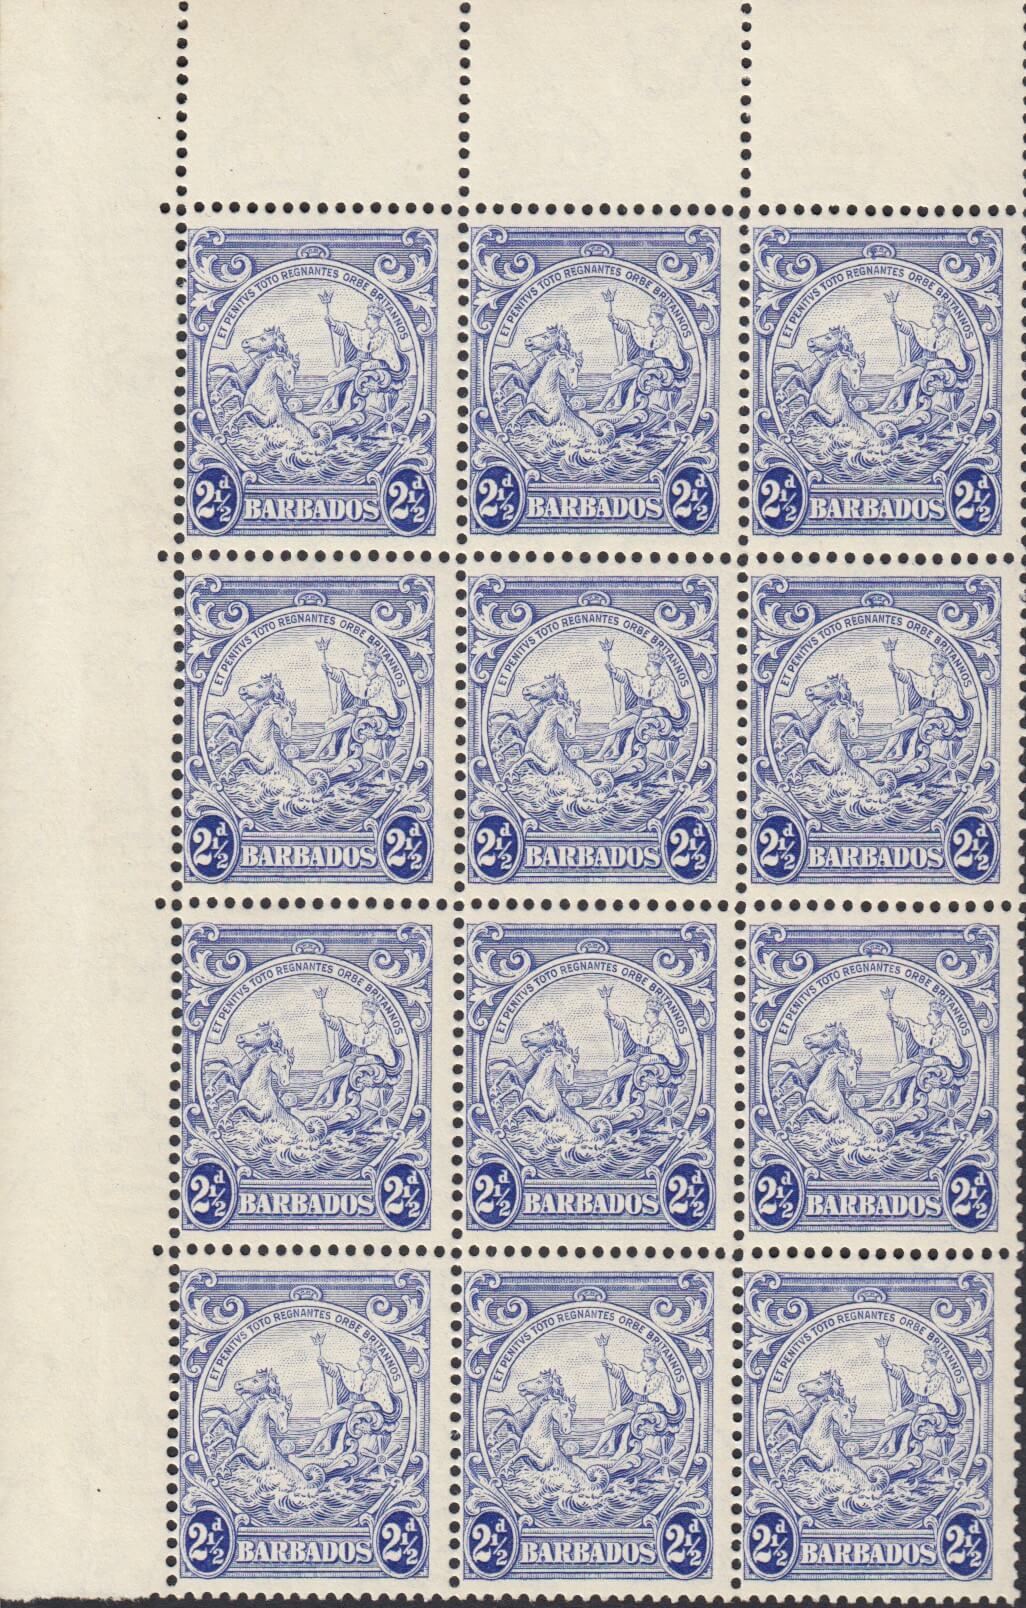 Barbados SG251a sheet with Mark on Central Ornament flaw